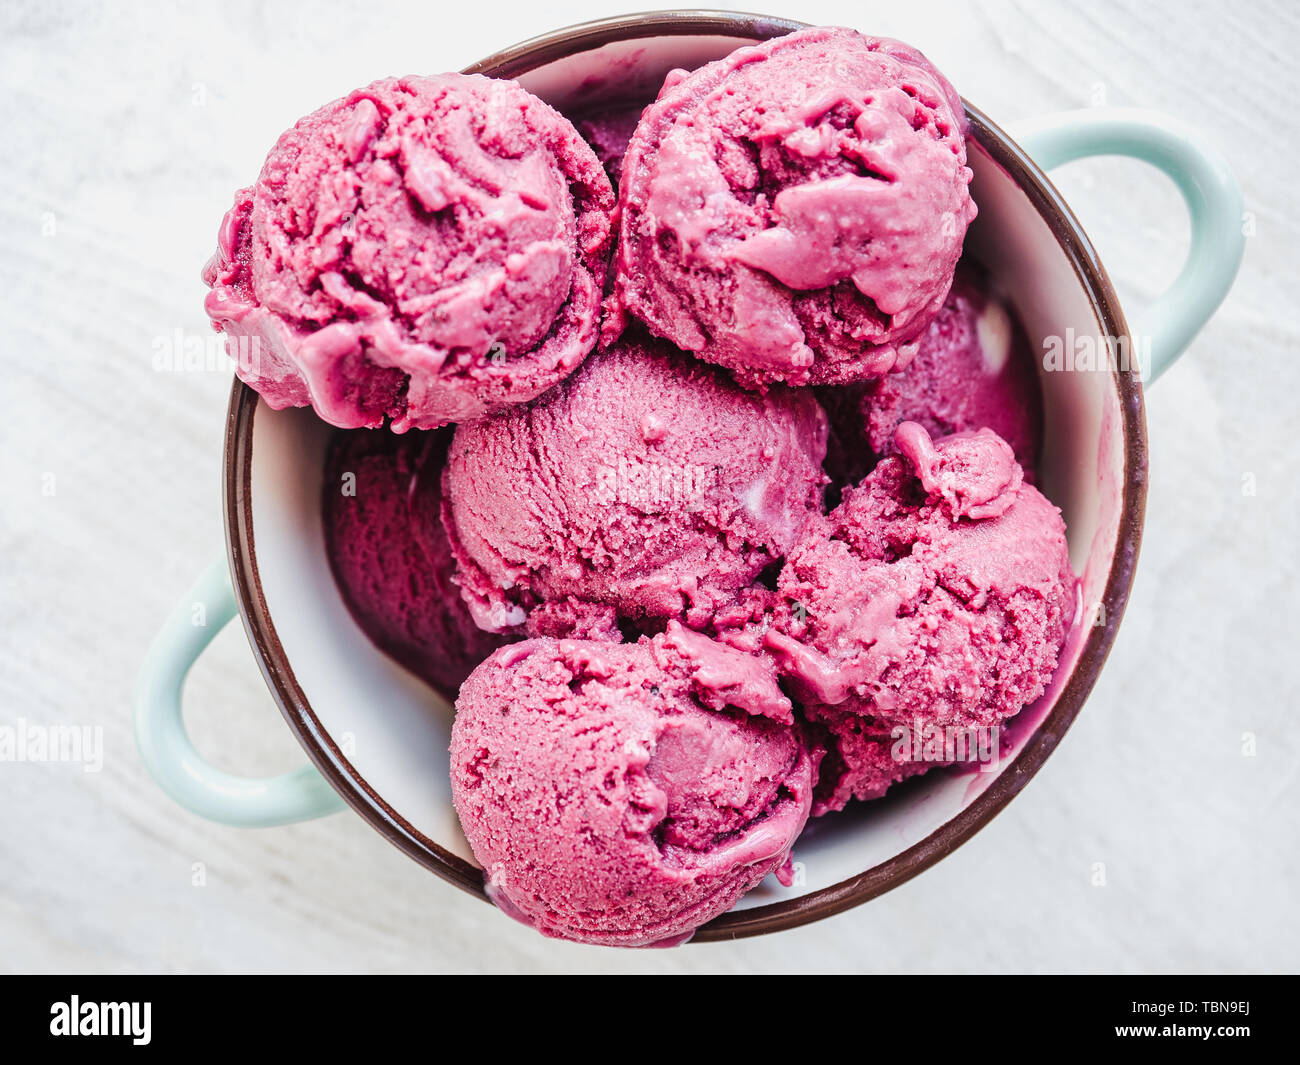 https://c8.alamy.com/comp/TBN9EJ/bright-fruit-ice-cream-on-a-vintage-plate-white-isolated-background-close-up-top-view-concept-of-tasty-and-healthy-food-TBN9EJ.jpg